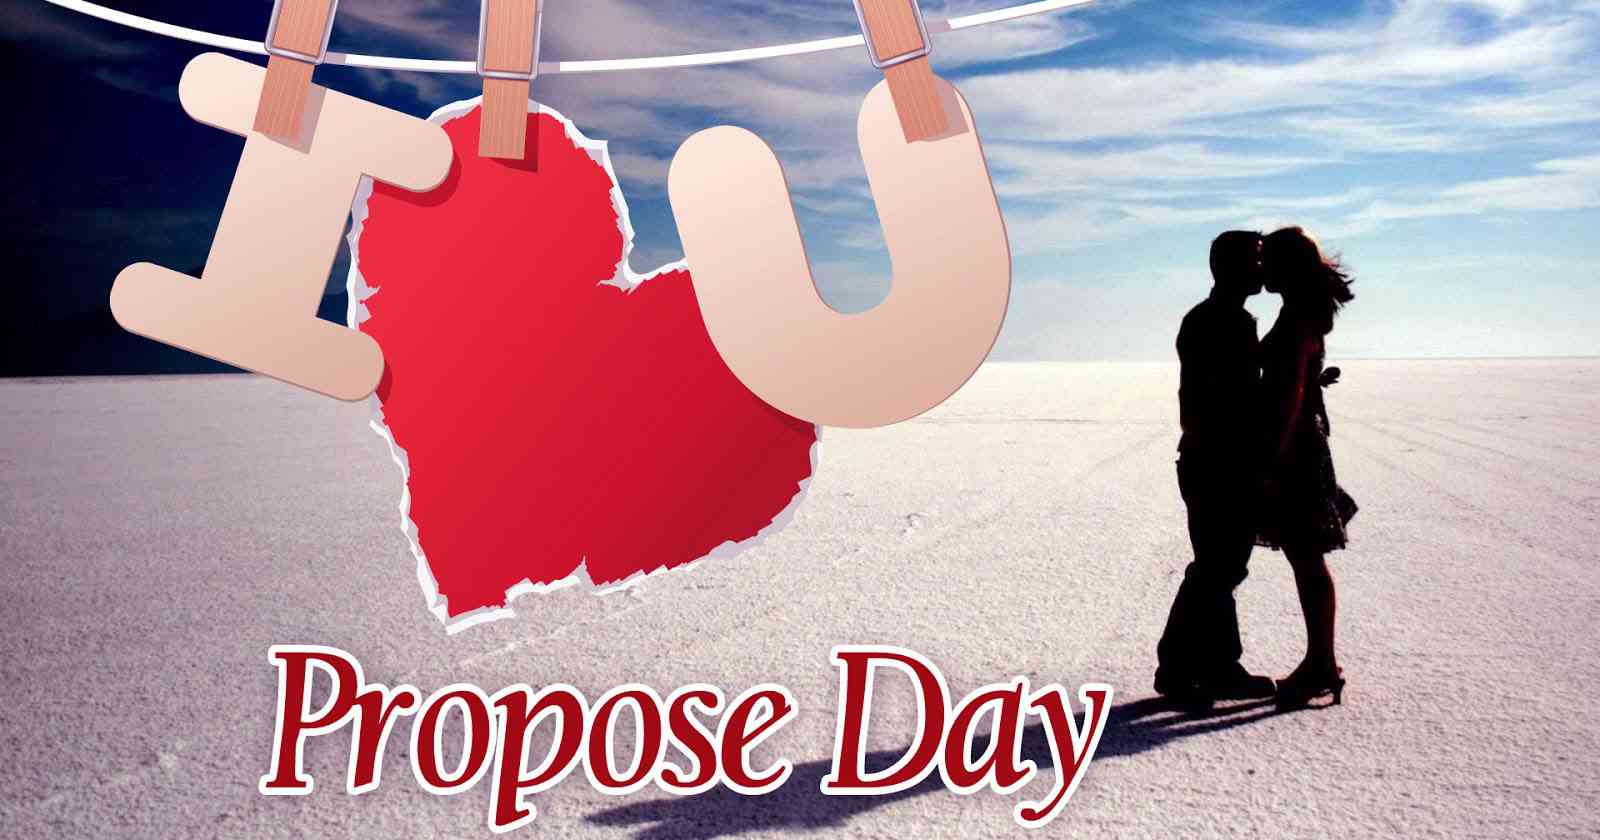 Propose Day HD Wallpaper Valentines Day Ideas, Wishes, SMS